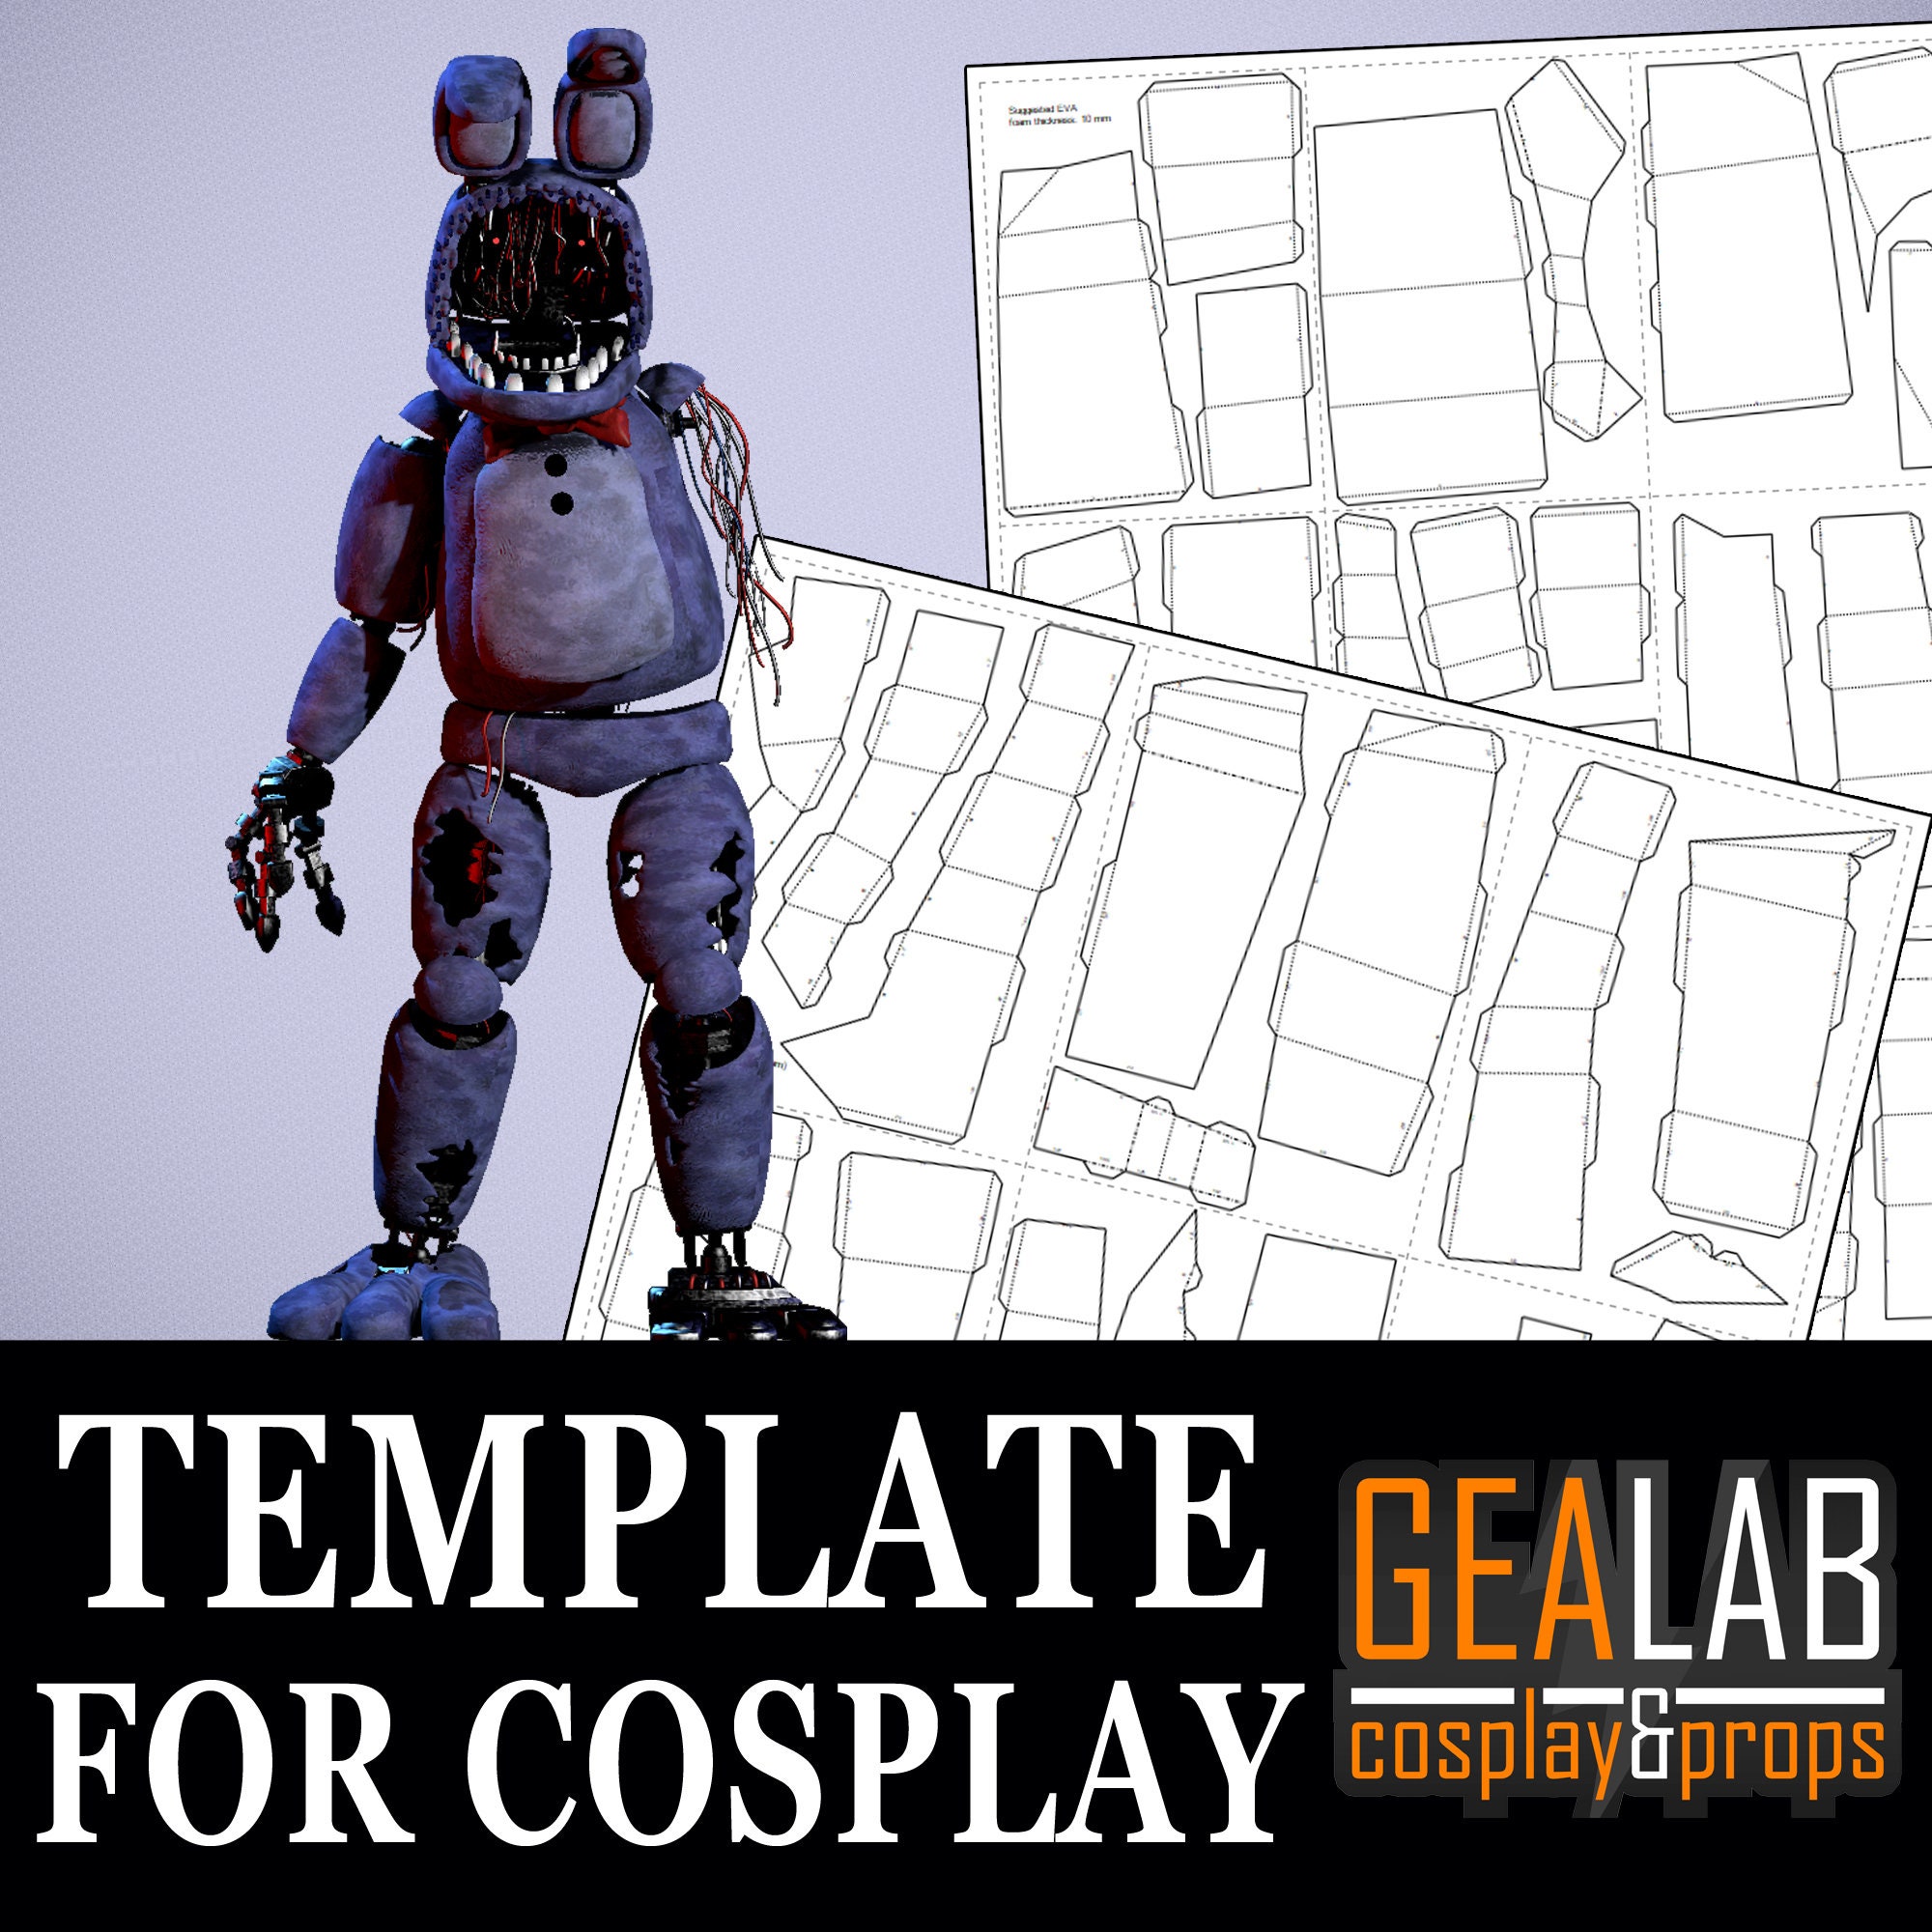 3D file FIVE NIGHTS AT FREDDY'S Nightmare Chica FILES FOR COSPLAY